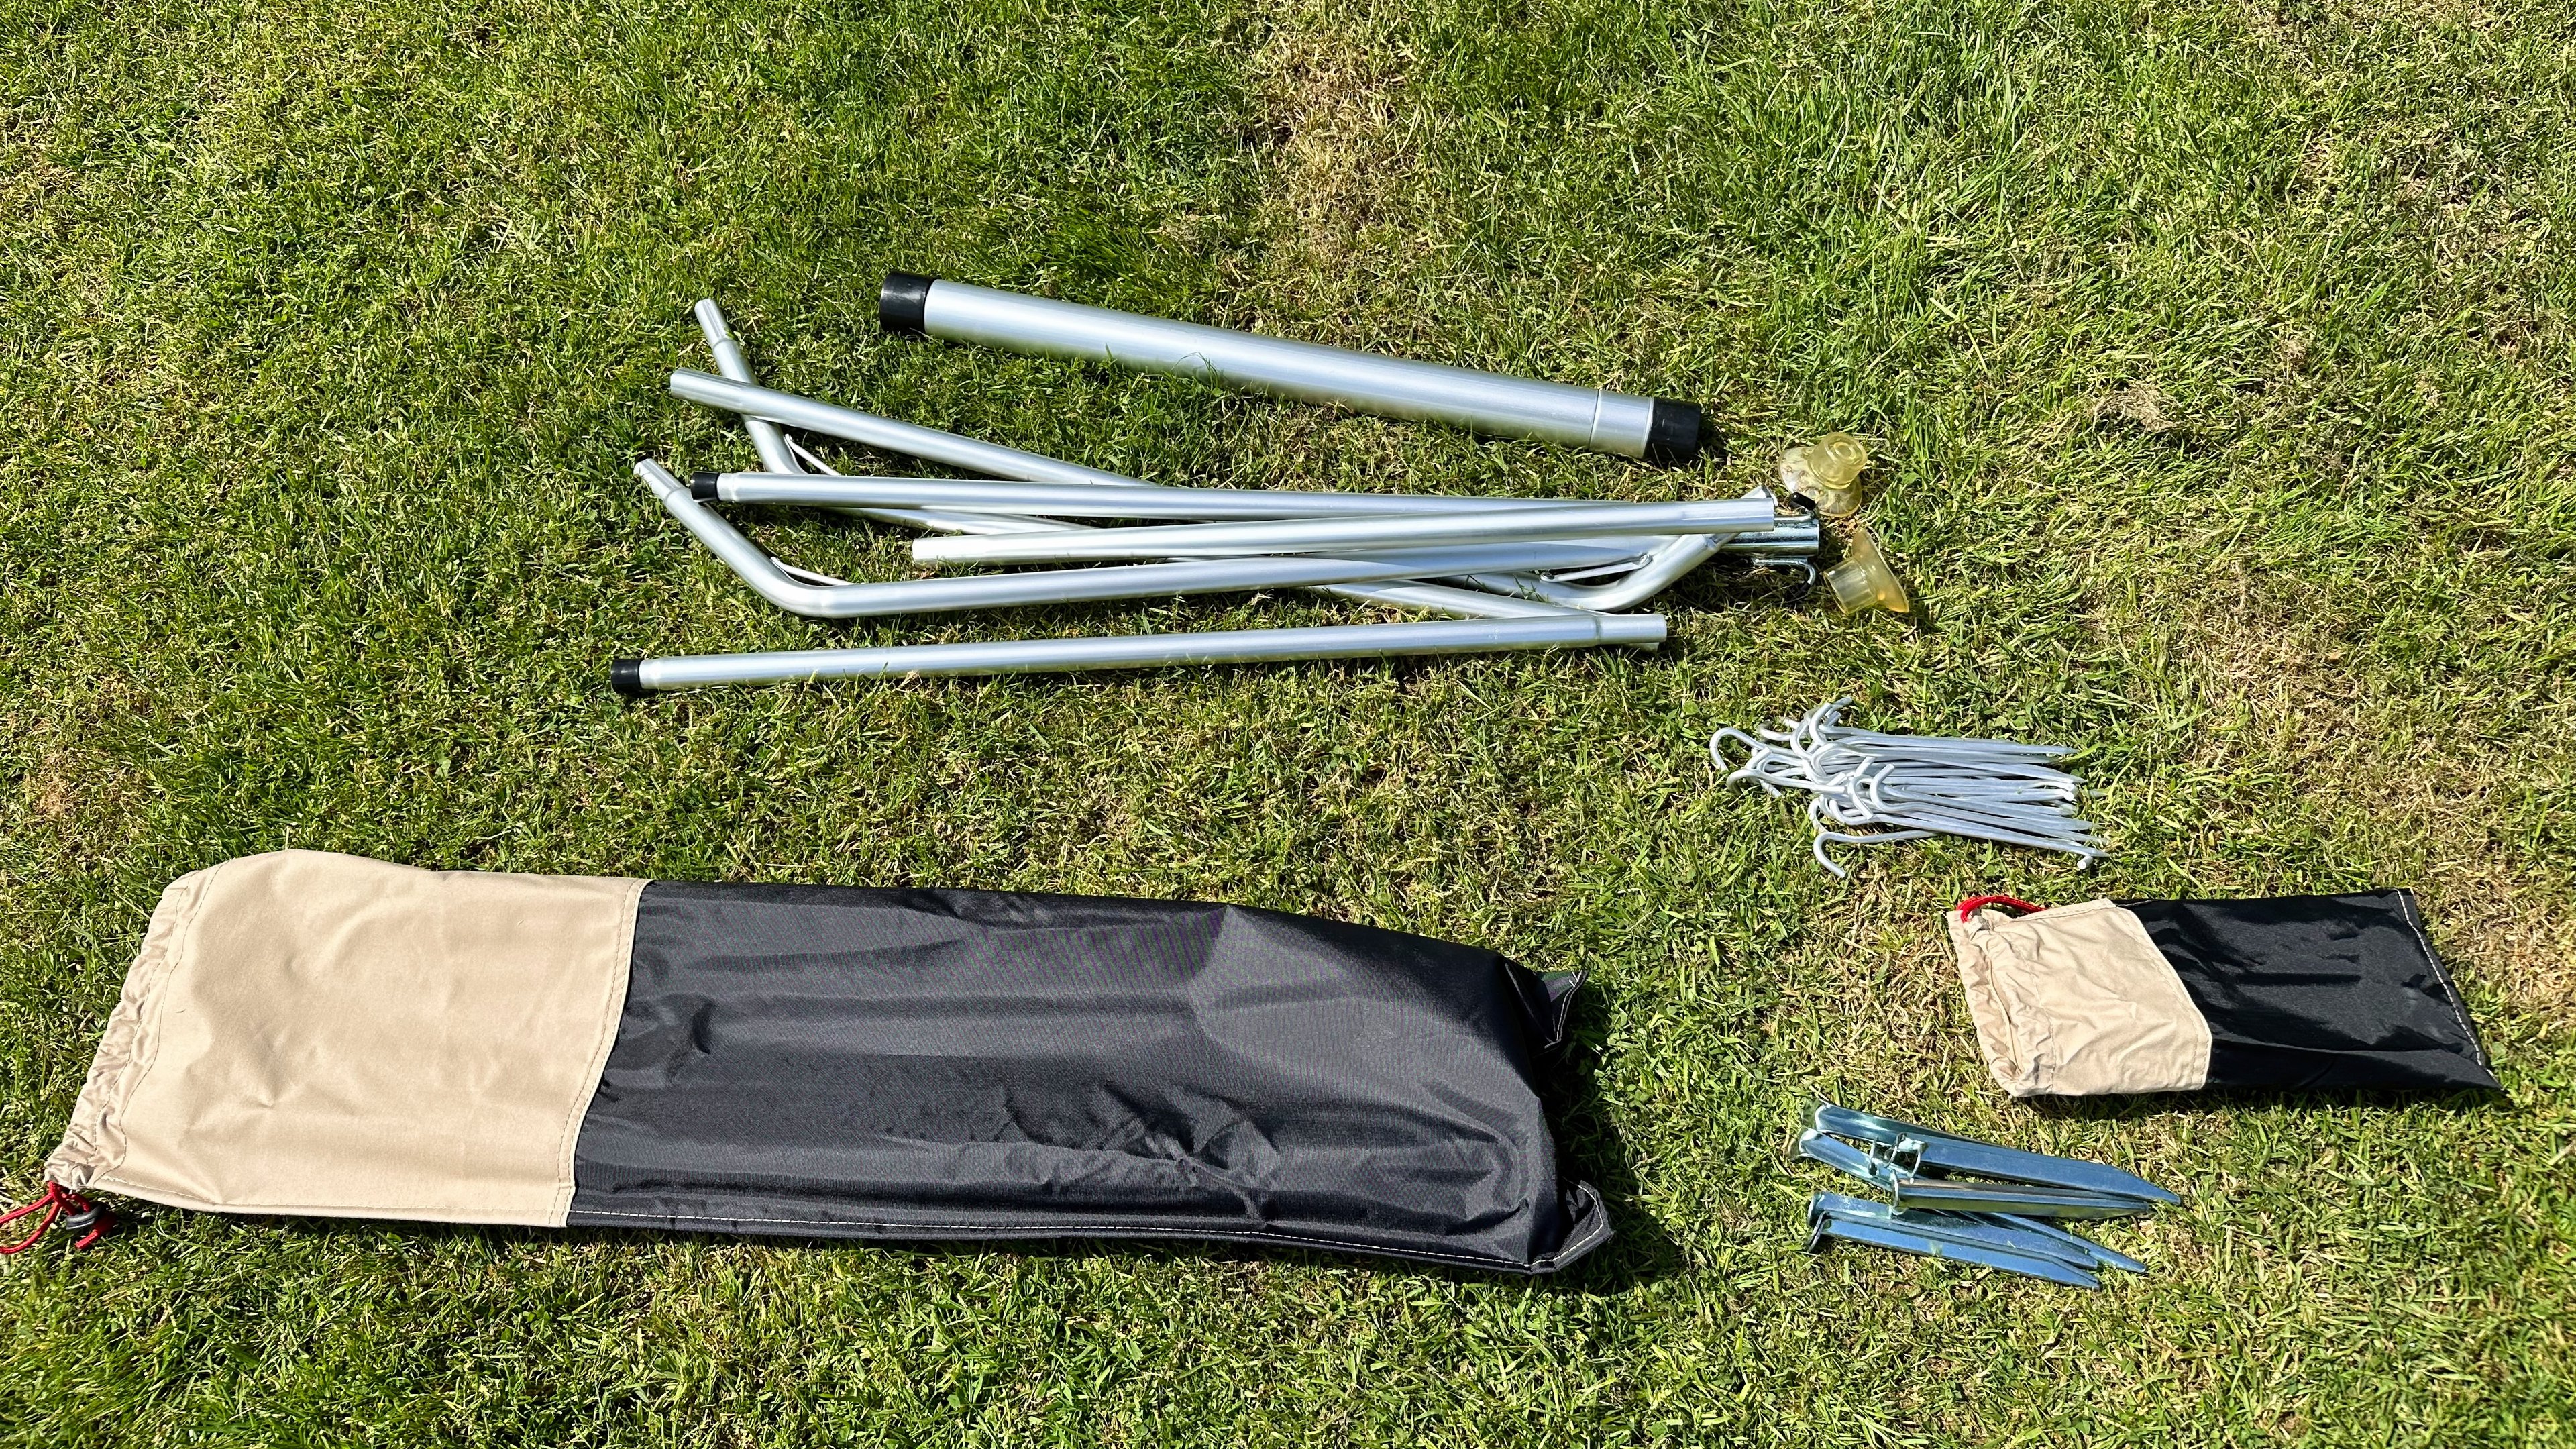 The tent poles and pegs.